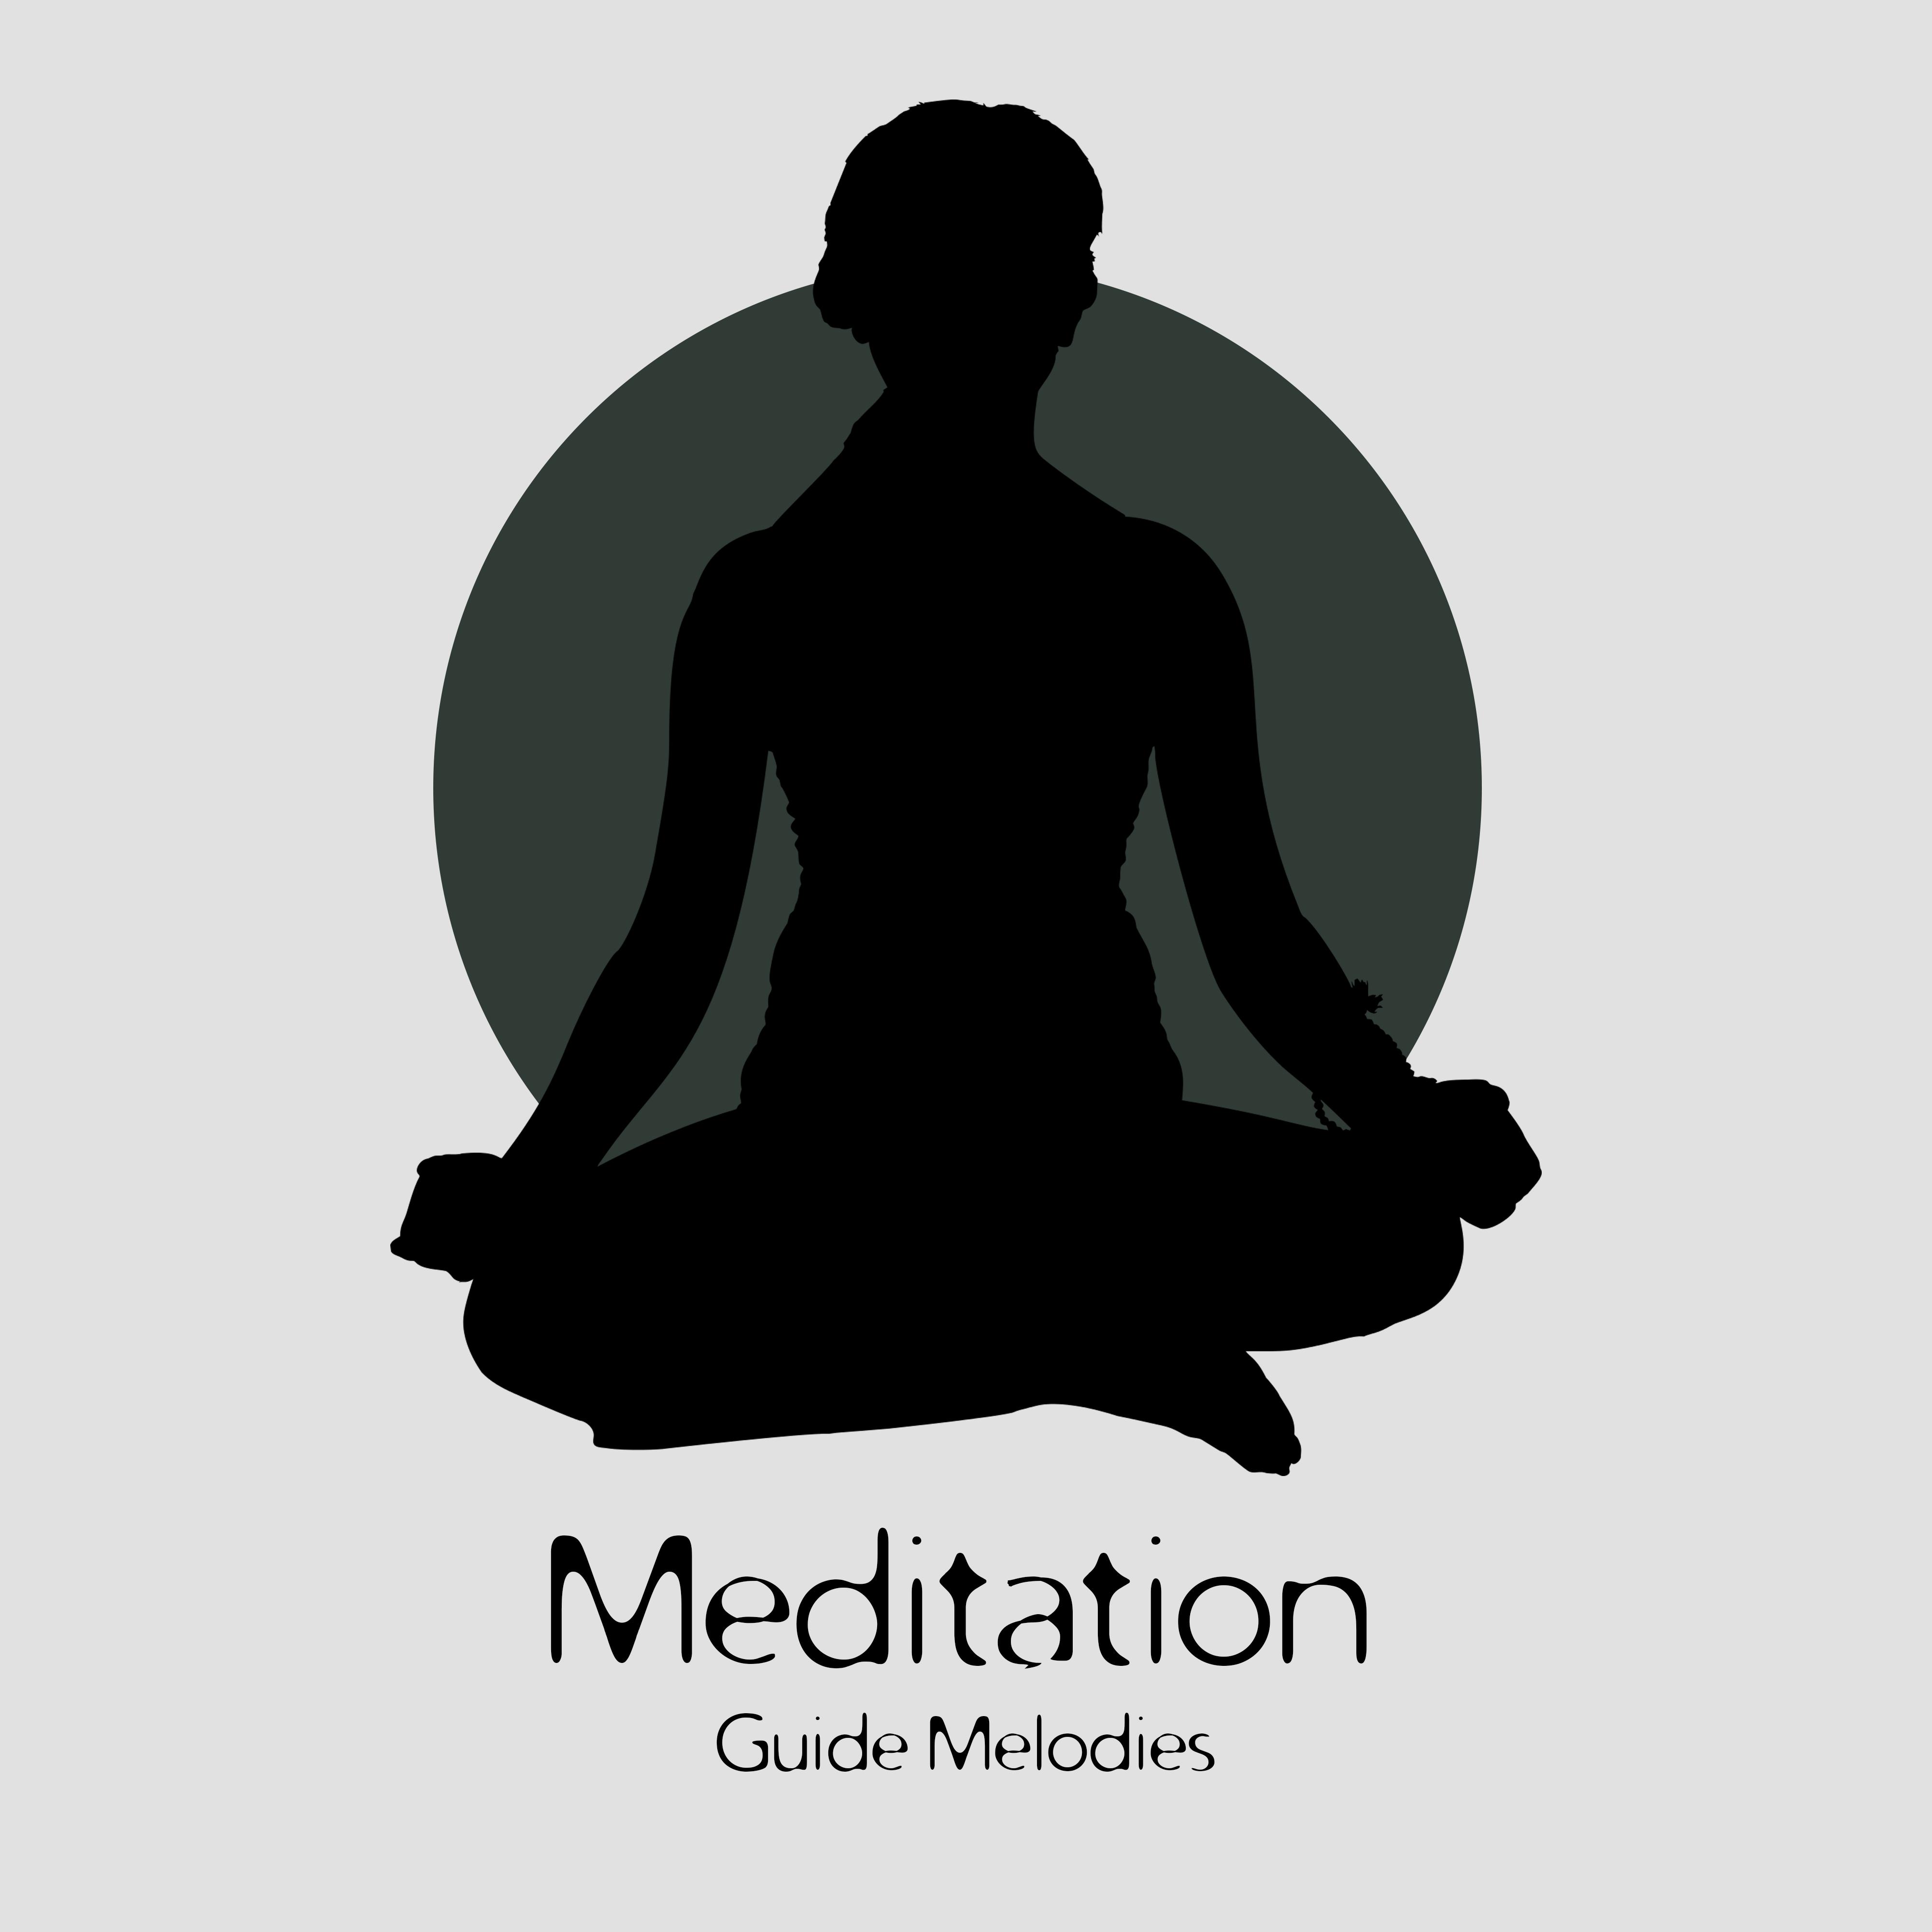 Meditation Guide Melodies